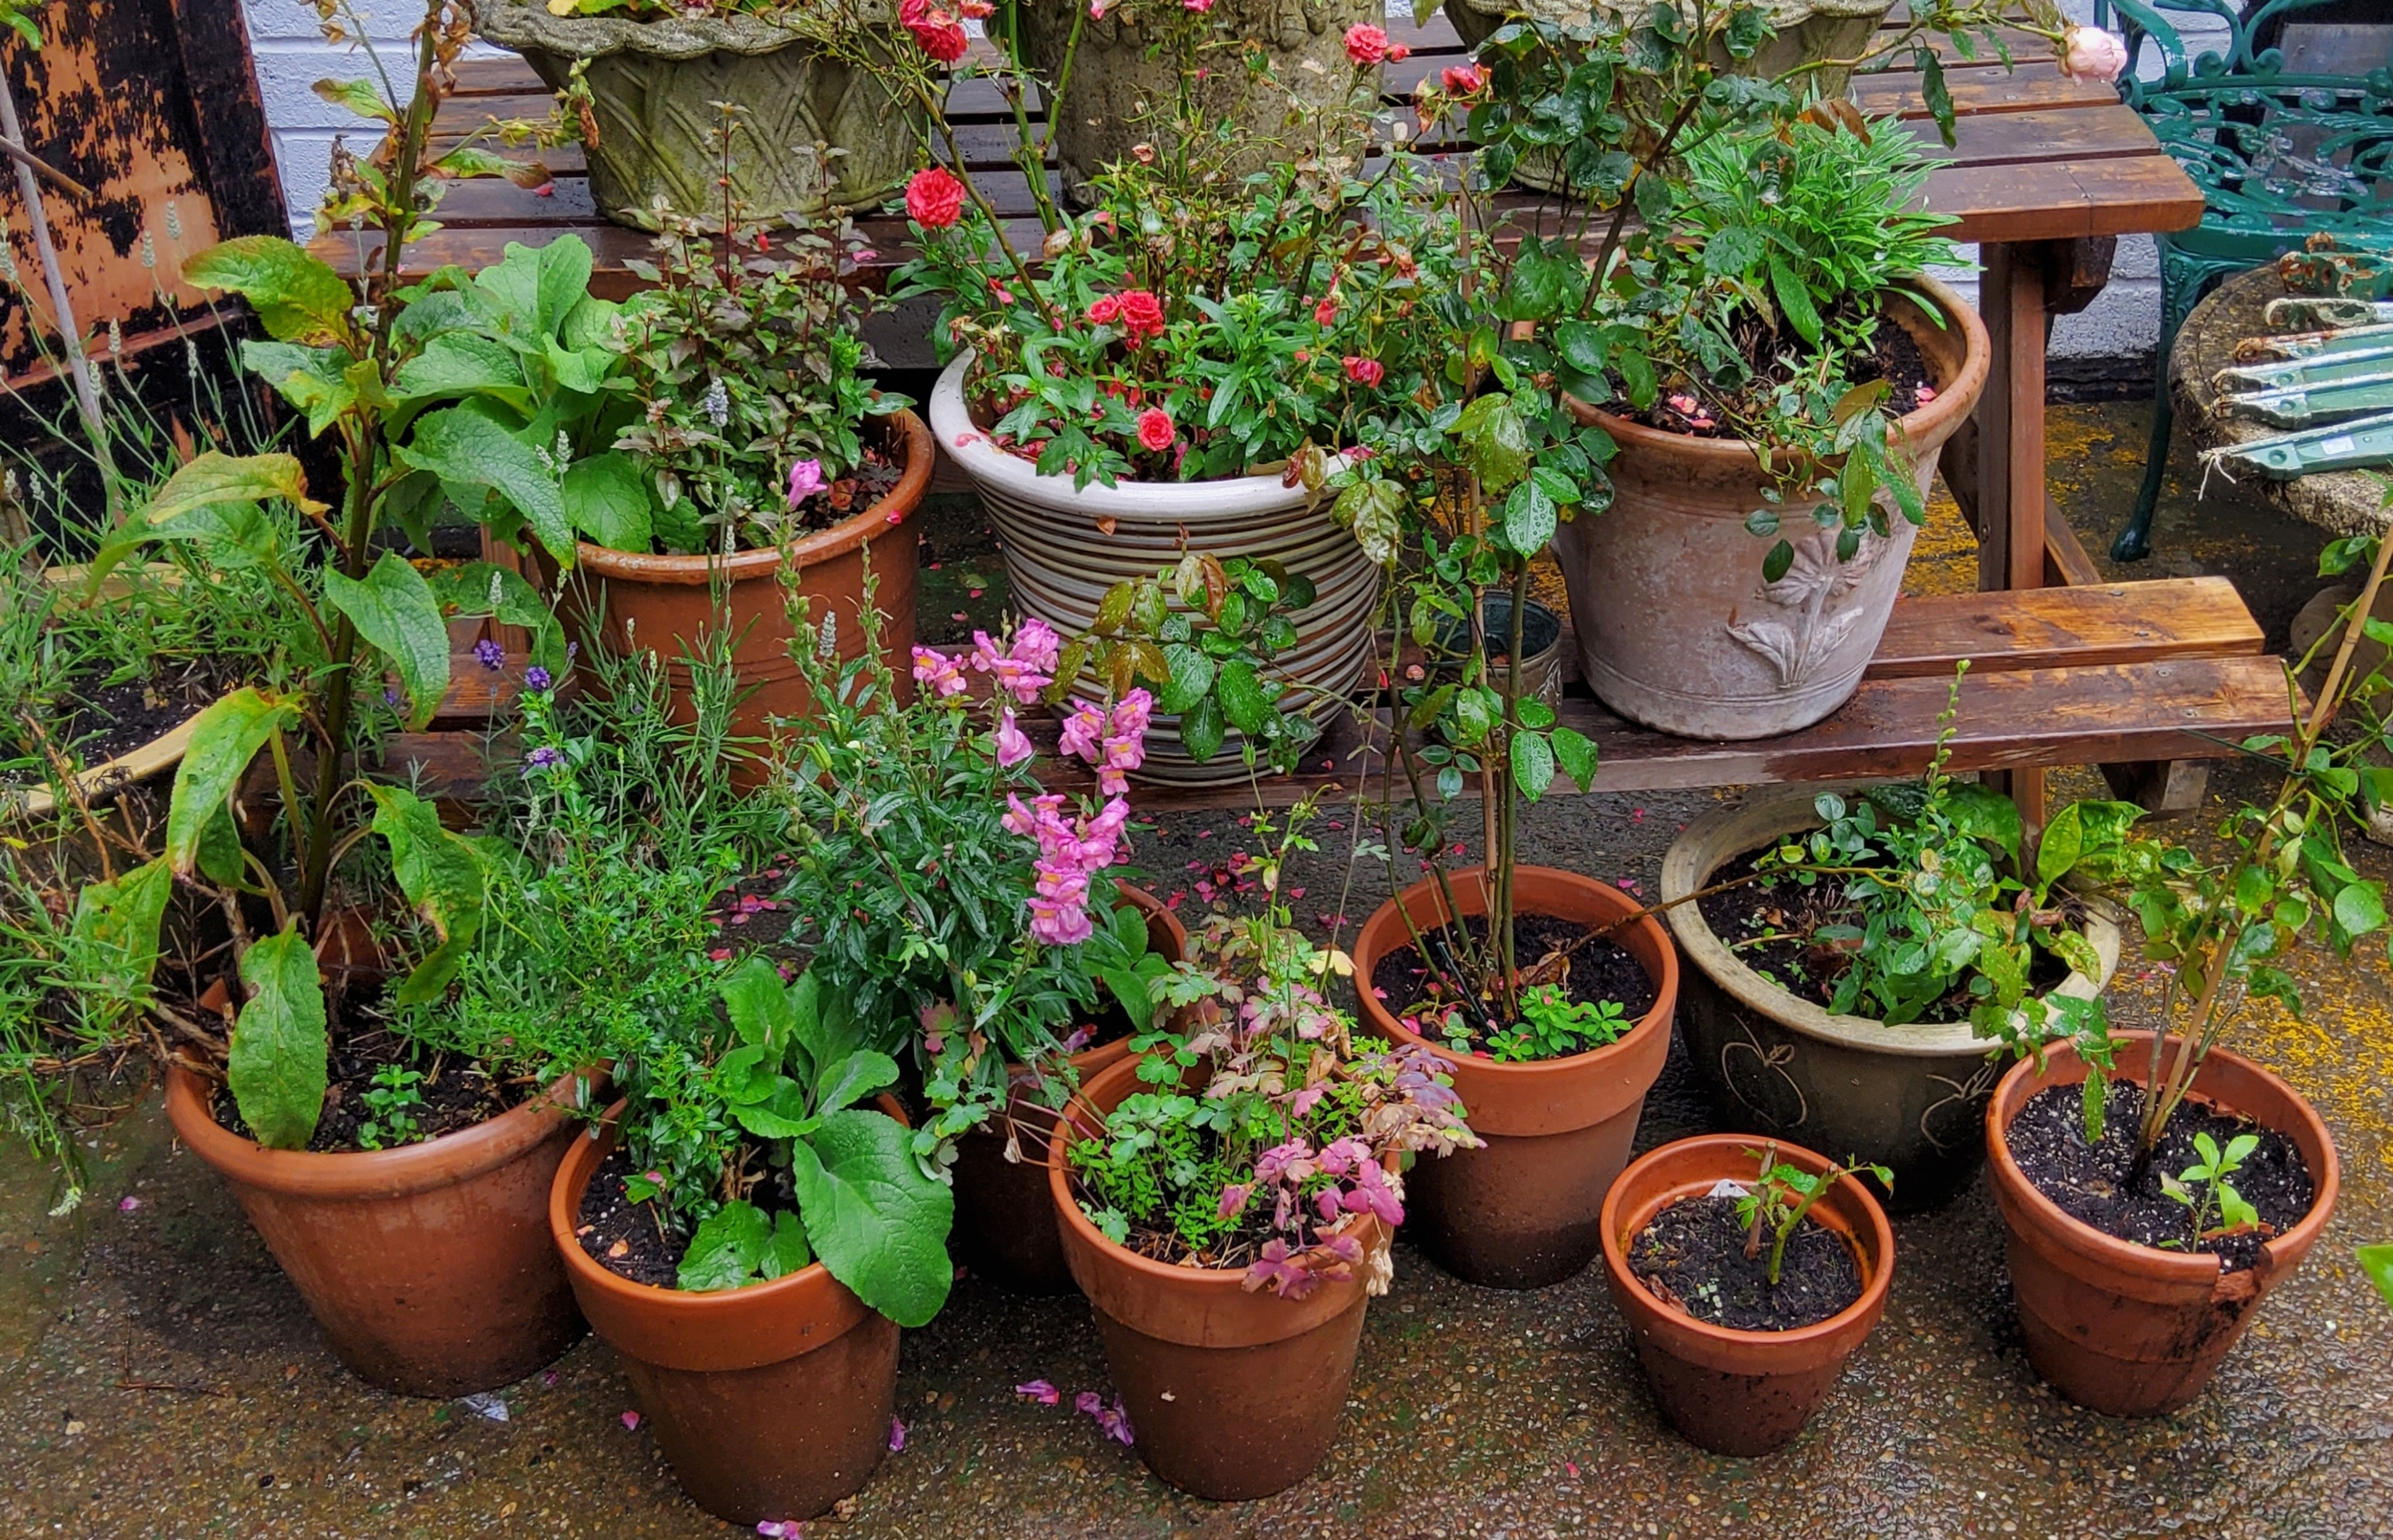 Eleven terracotta plant pots with plants, various sizes and styles, including roses, snap dragons